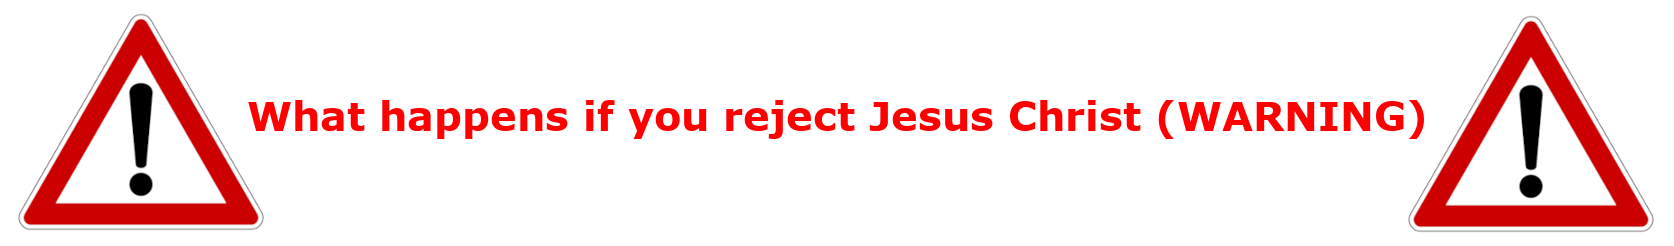 Auchtung! What Happens if You Reject Jesus?